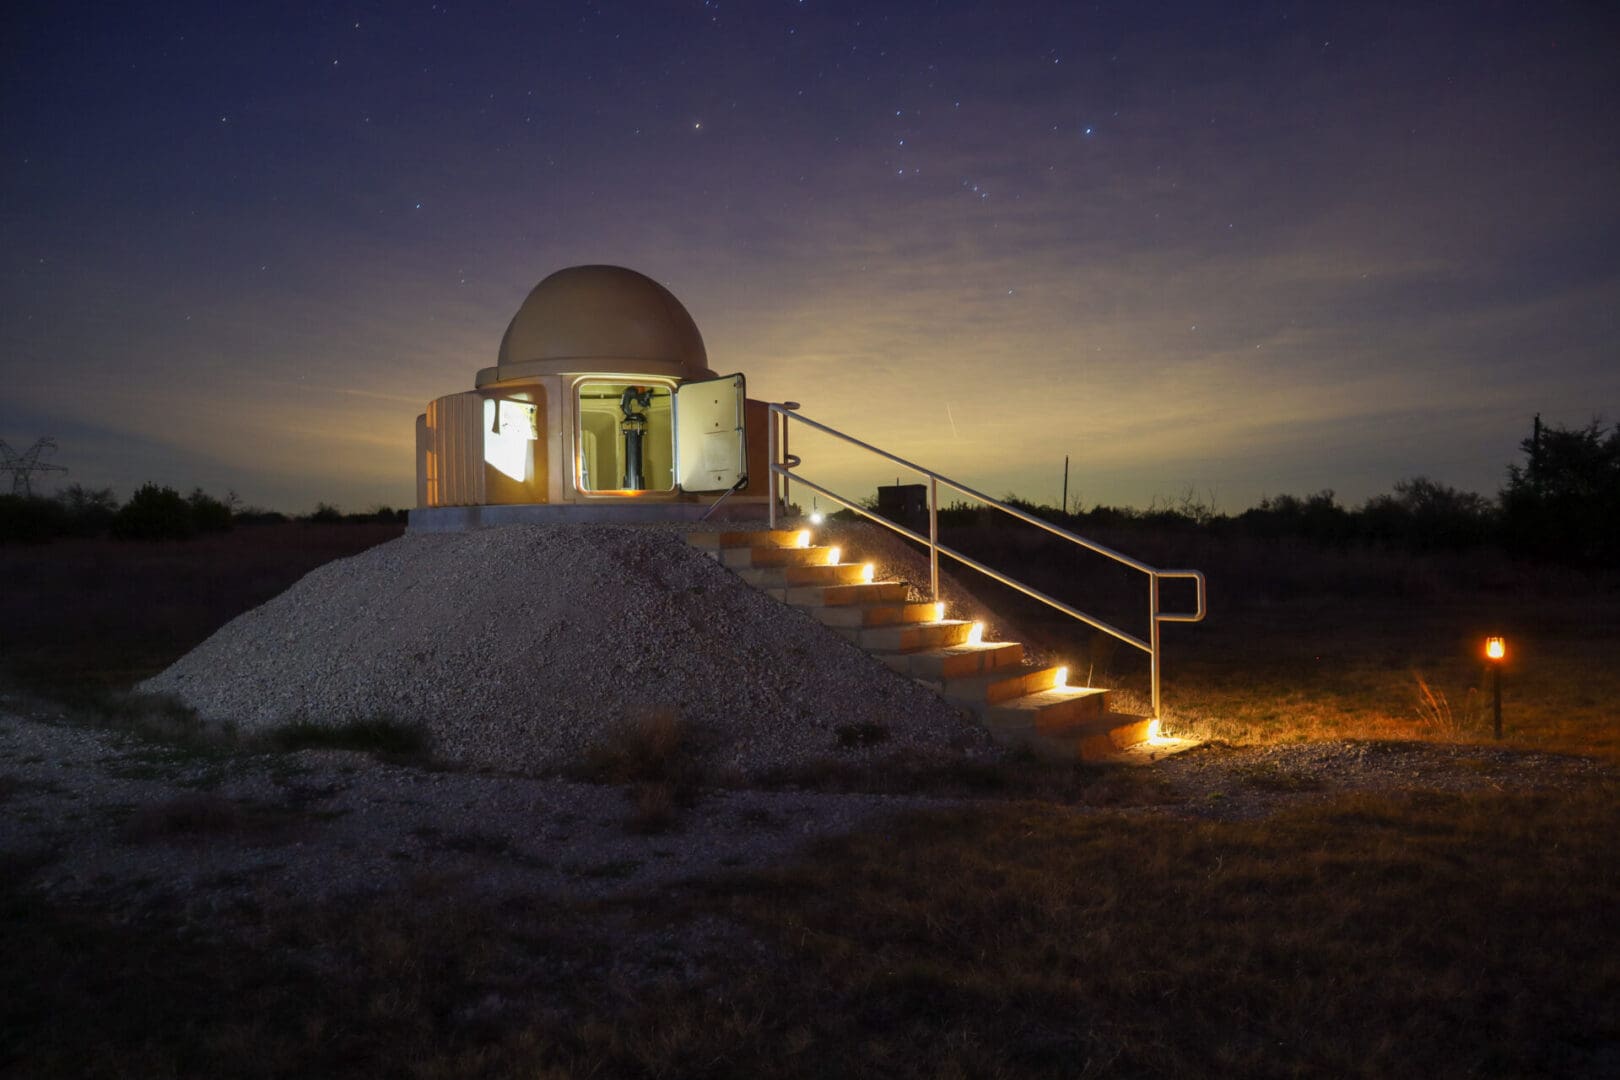 Image Showing The Observatory Night Area